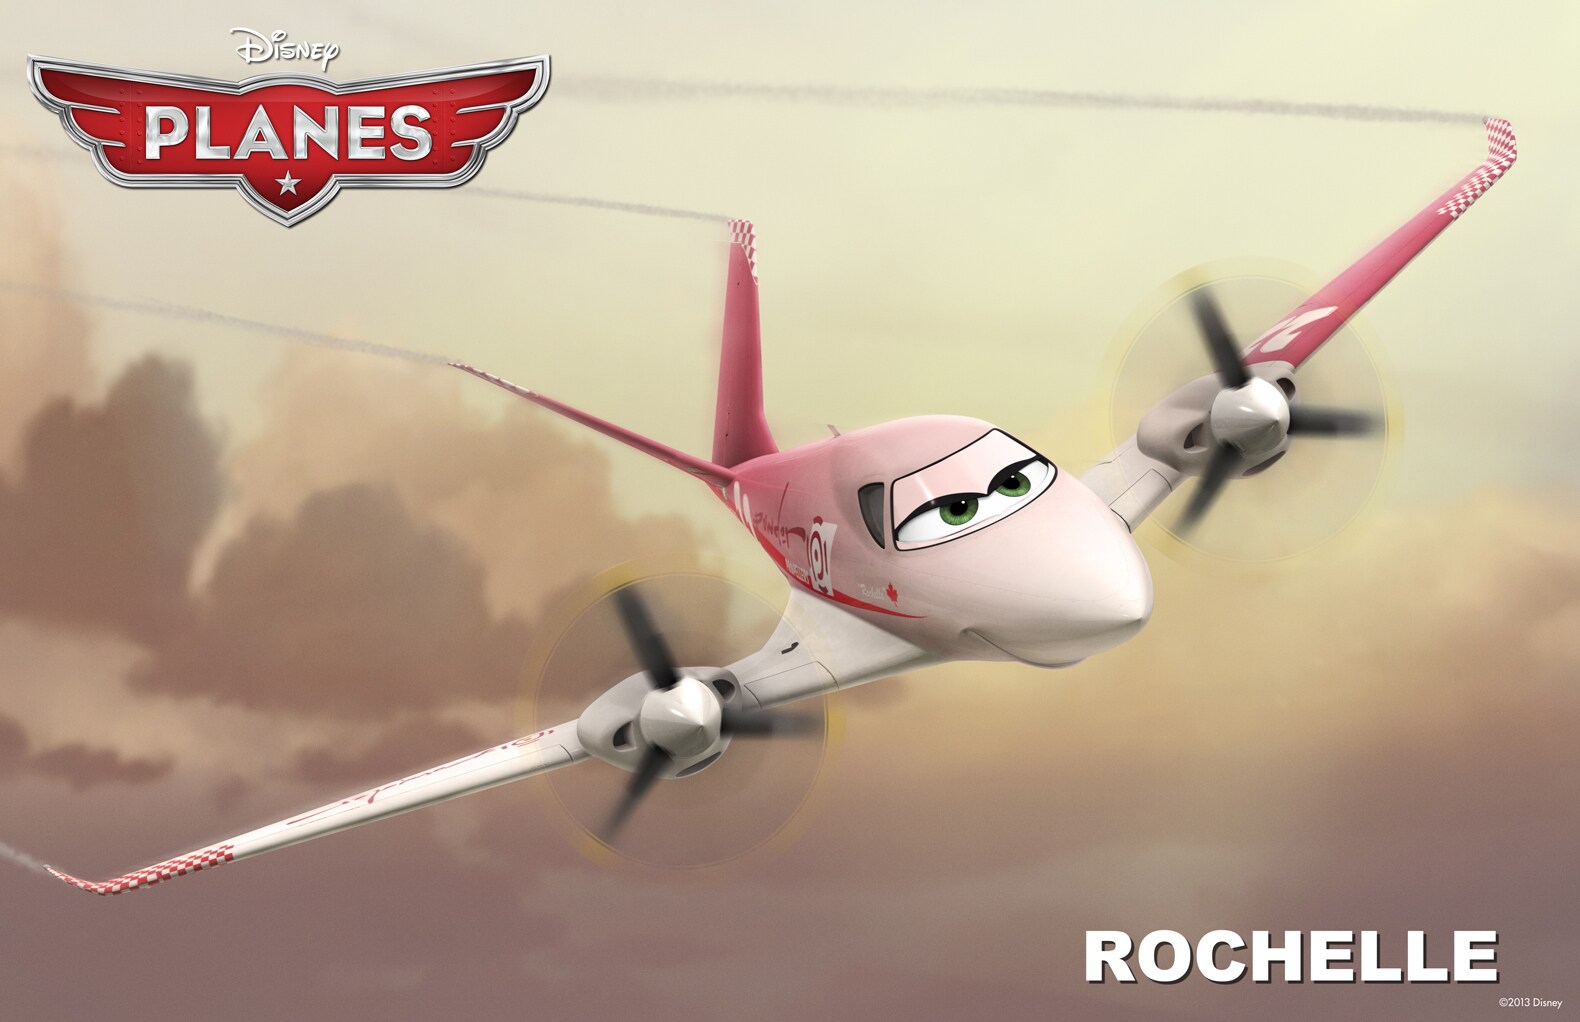 Rochelle is a tough racer and the pride of the Great White North. From the movie "Planes"